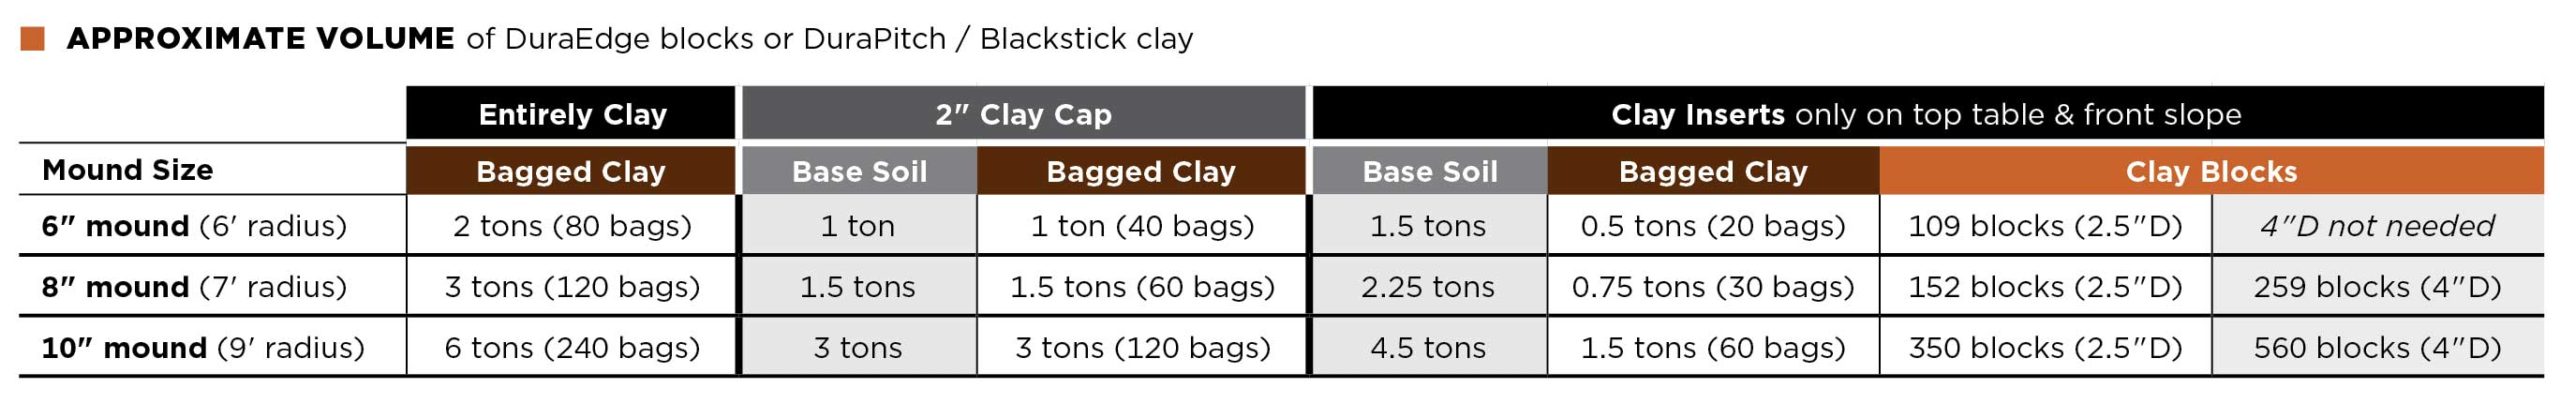 Table: APPROXIMATE VOLUMES of DuraEdge blocks or DuraPitch / Blackstick clay